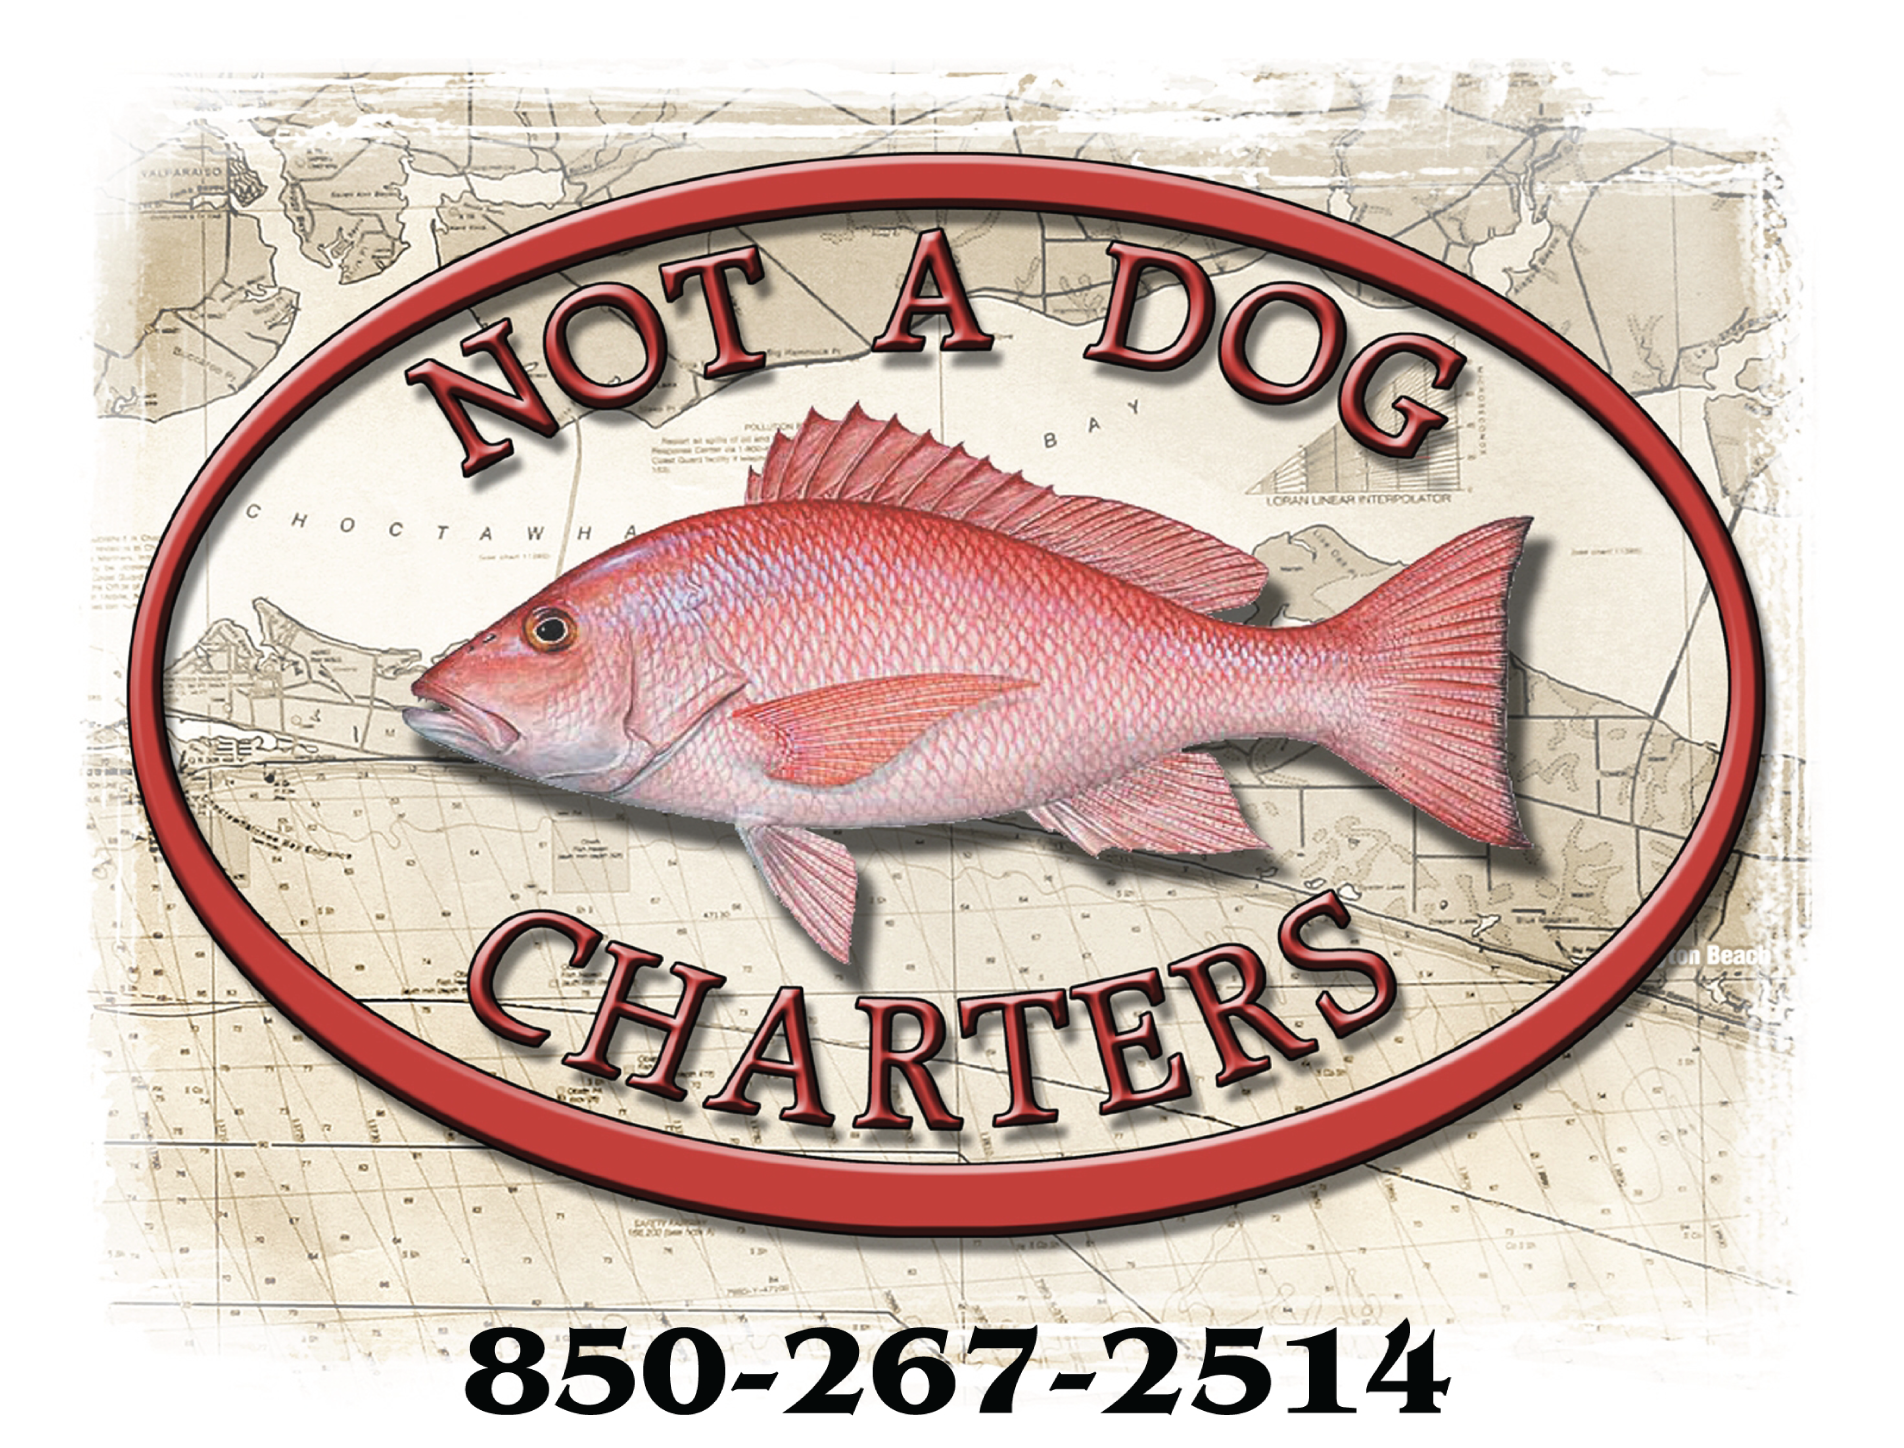 Not a Dog Charters